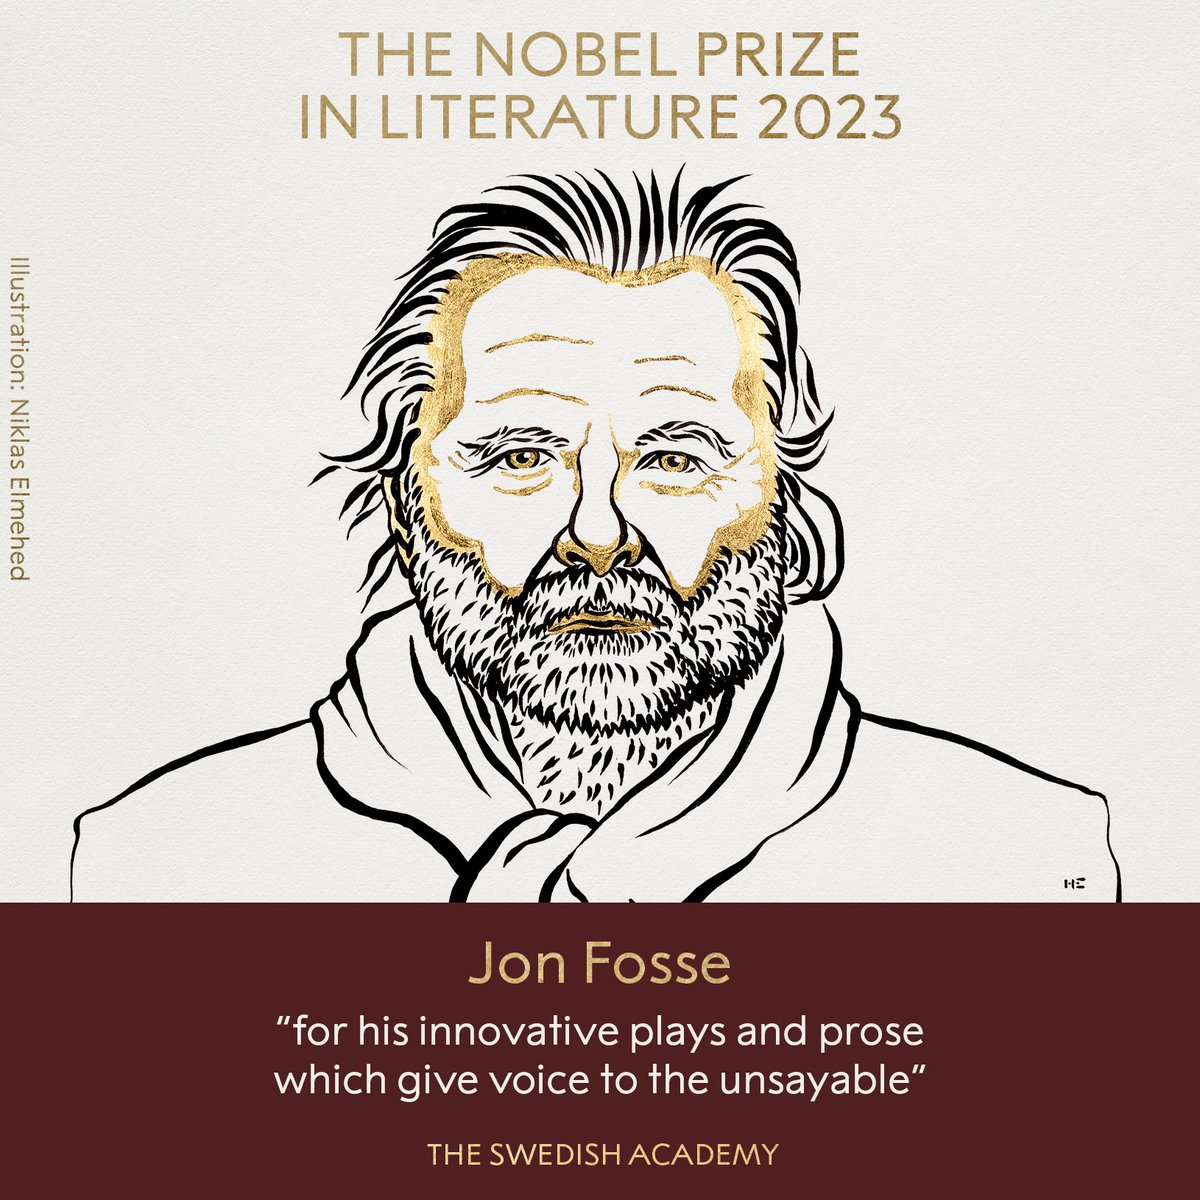 BREAKING NEWS The 2023 #NobelPrize in Literature is awarded to the Norwegian author Jon Fosse “for his innovative plays and prose which give voice to the unsayable.”